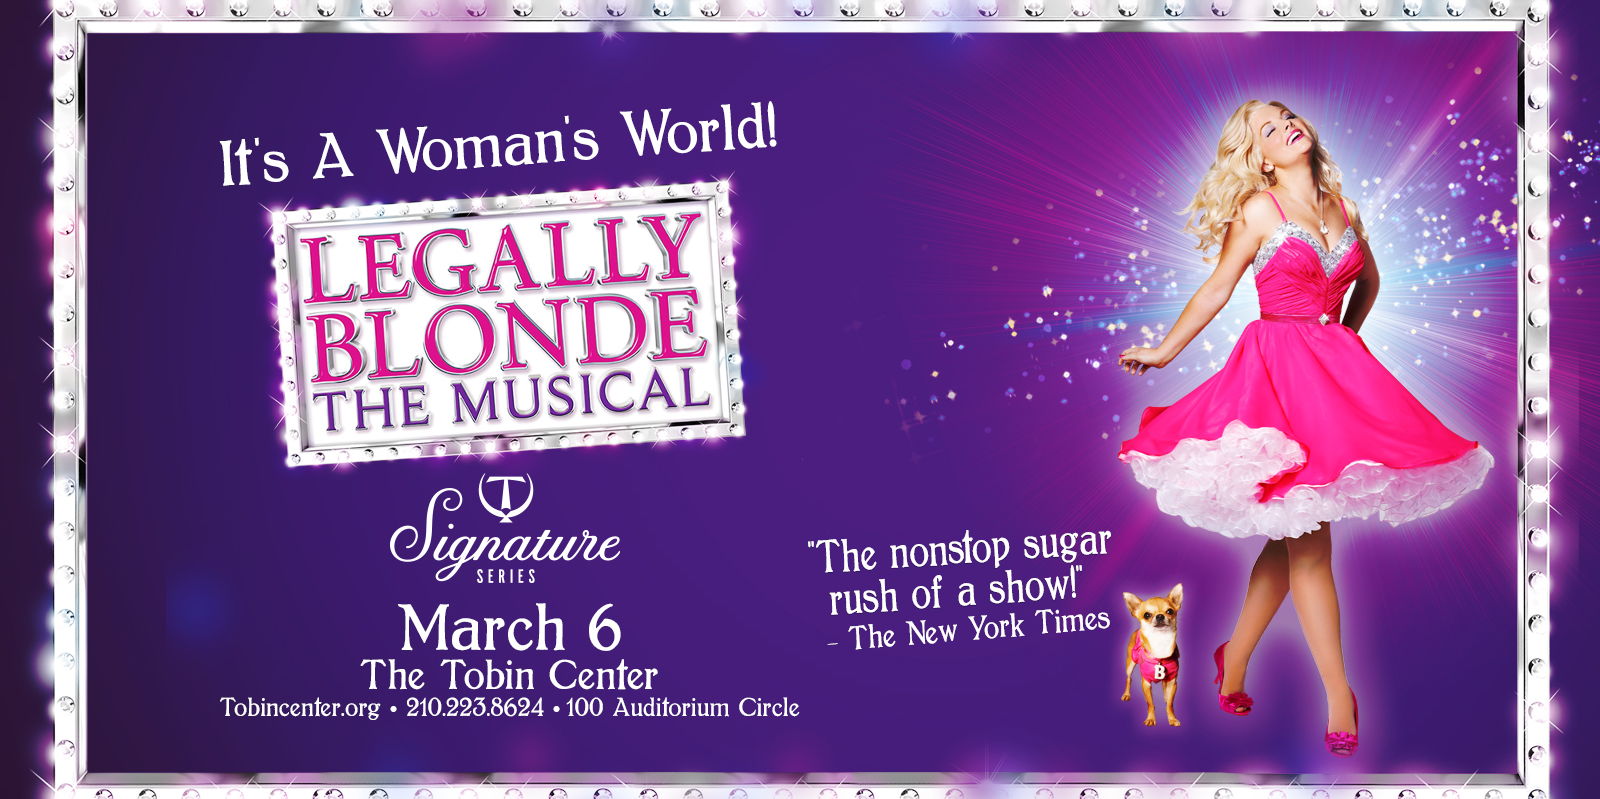 Legally Blonde The Musical promotional image